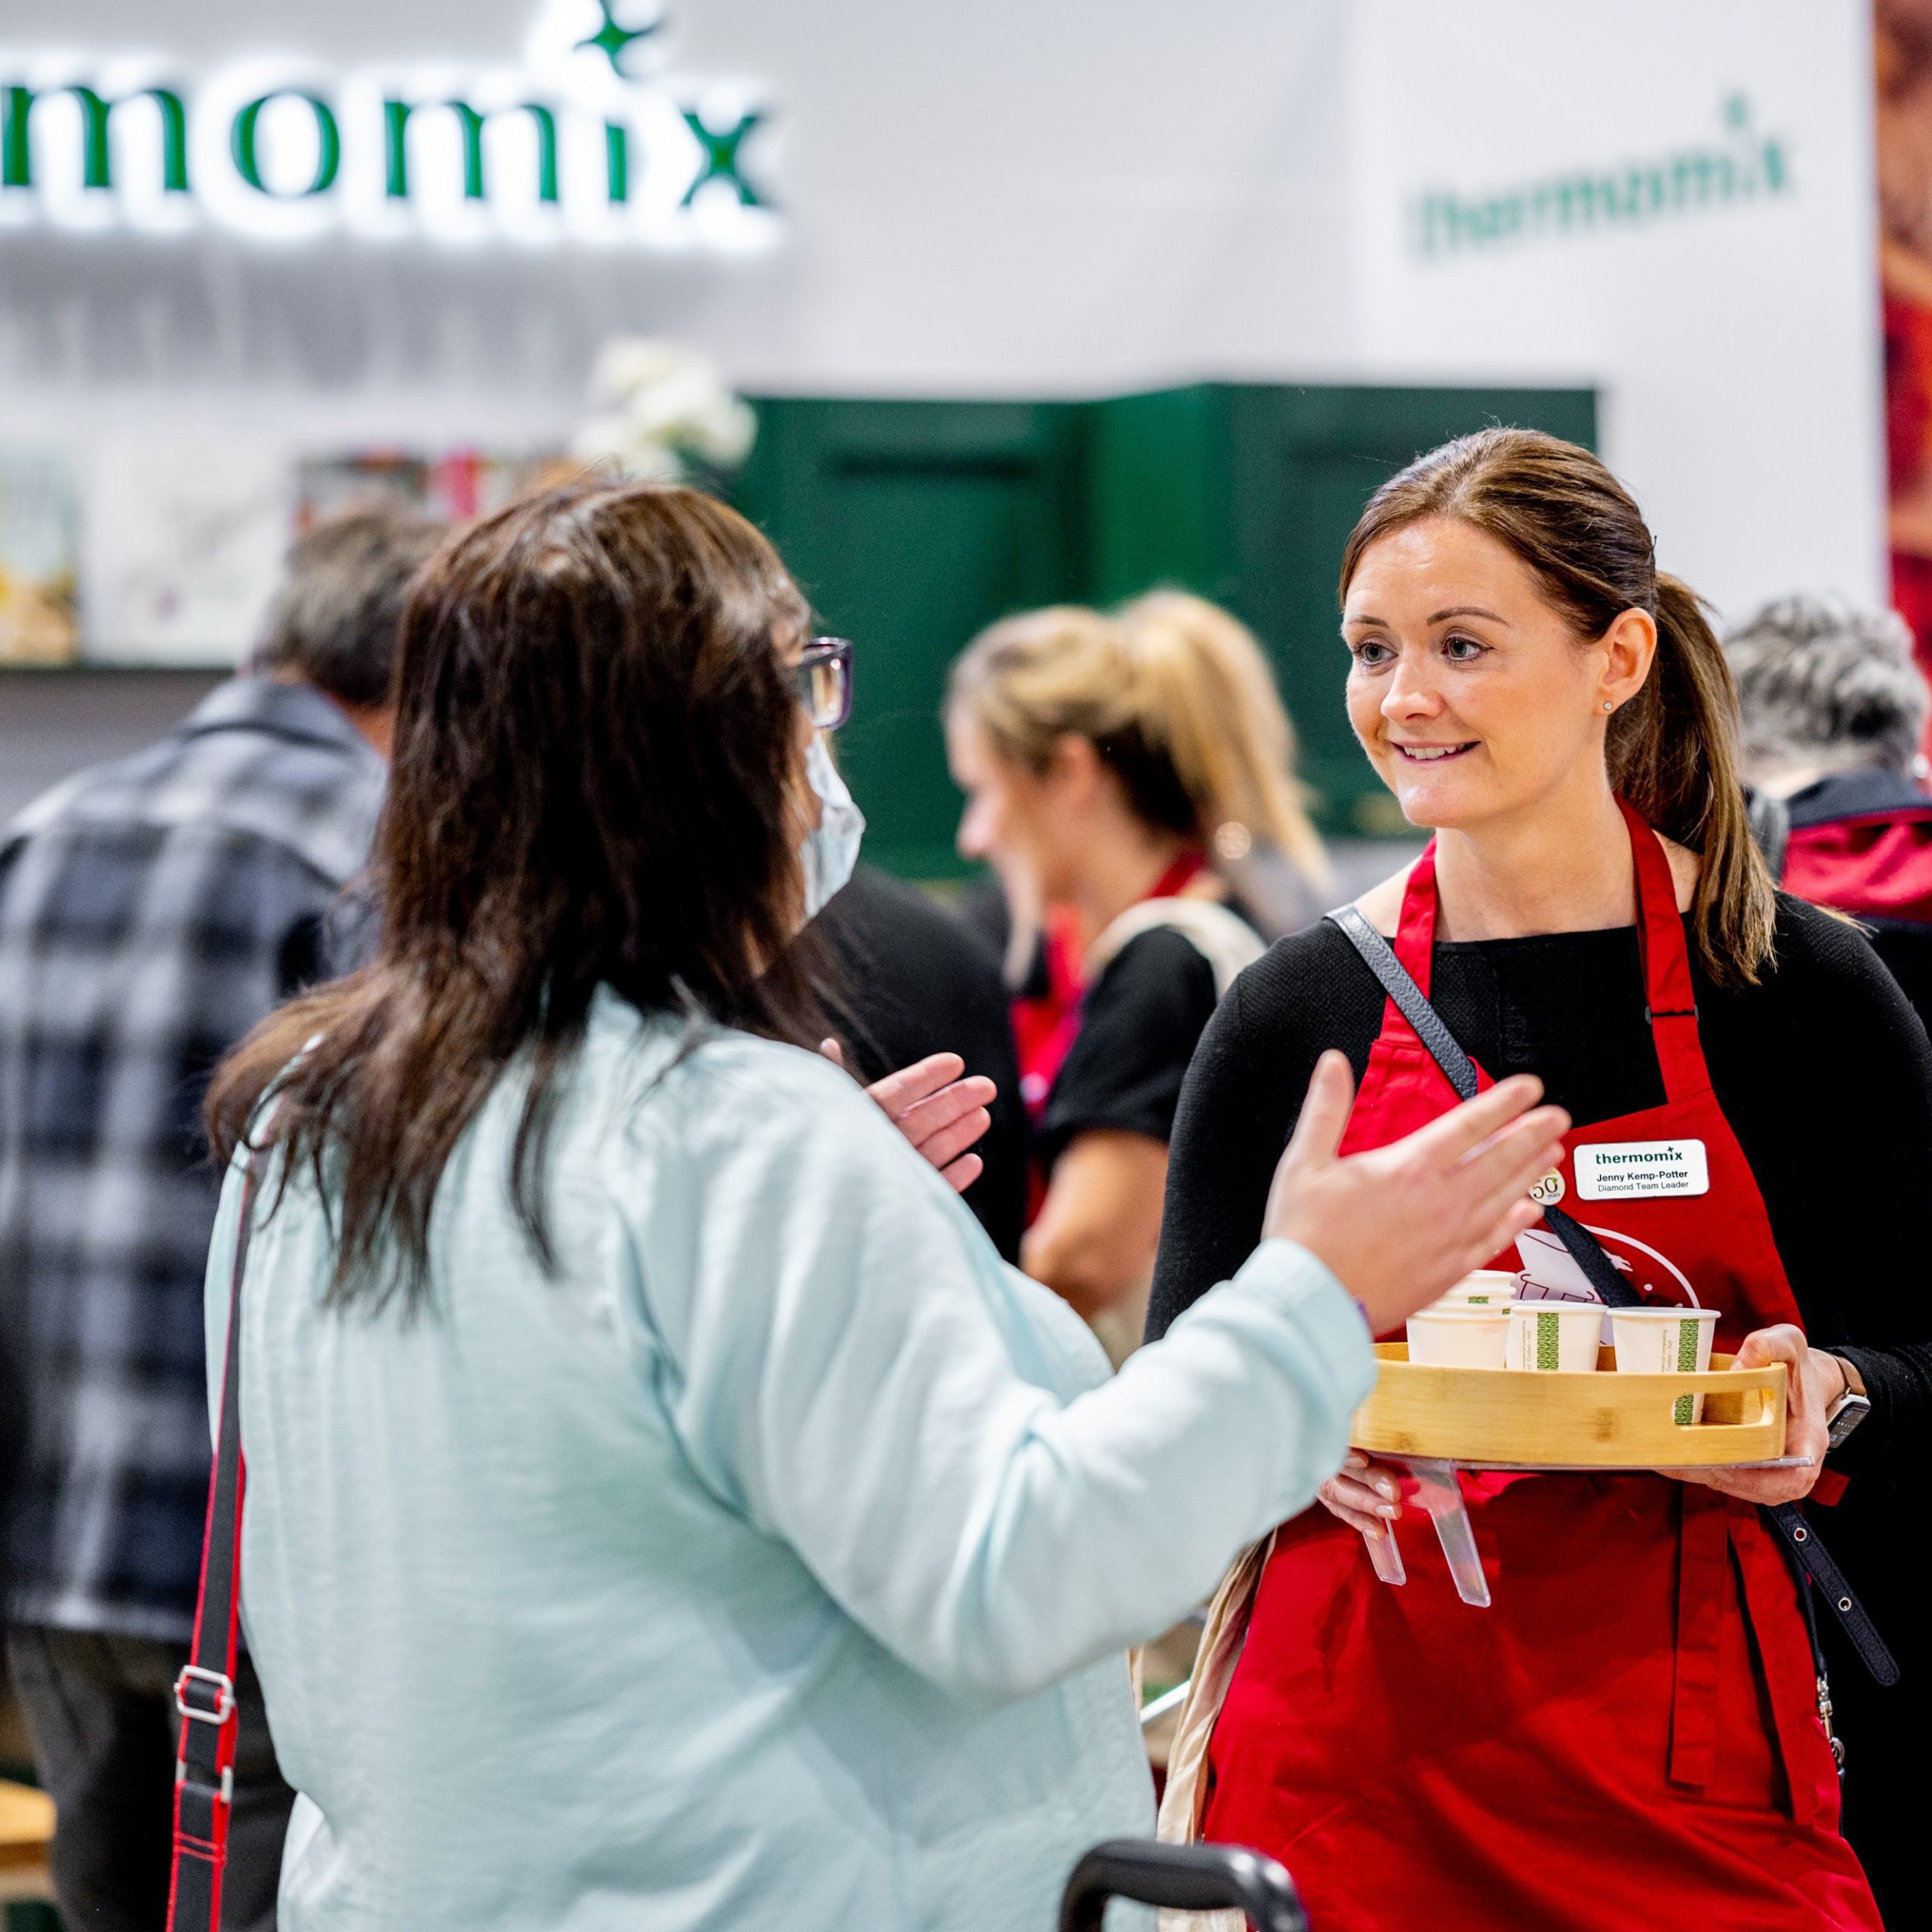 Thermomix representative with a tray of samples, talking to a customer